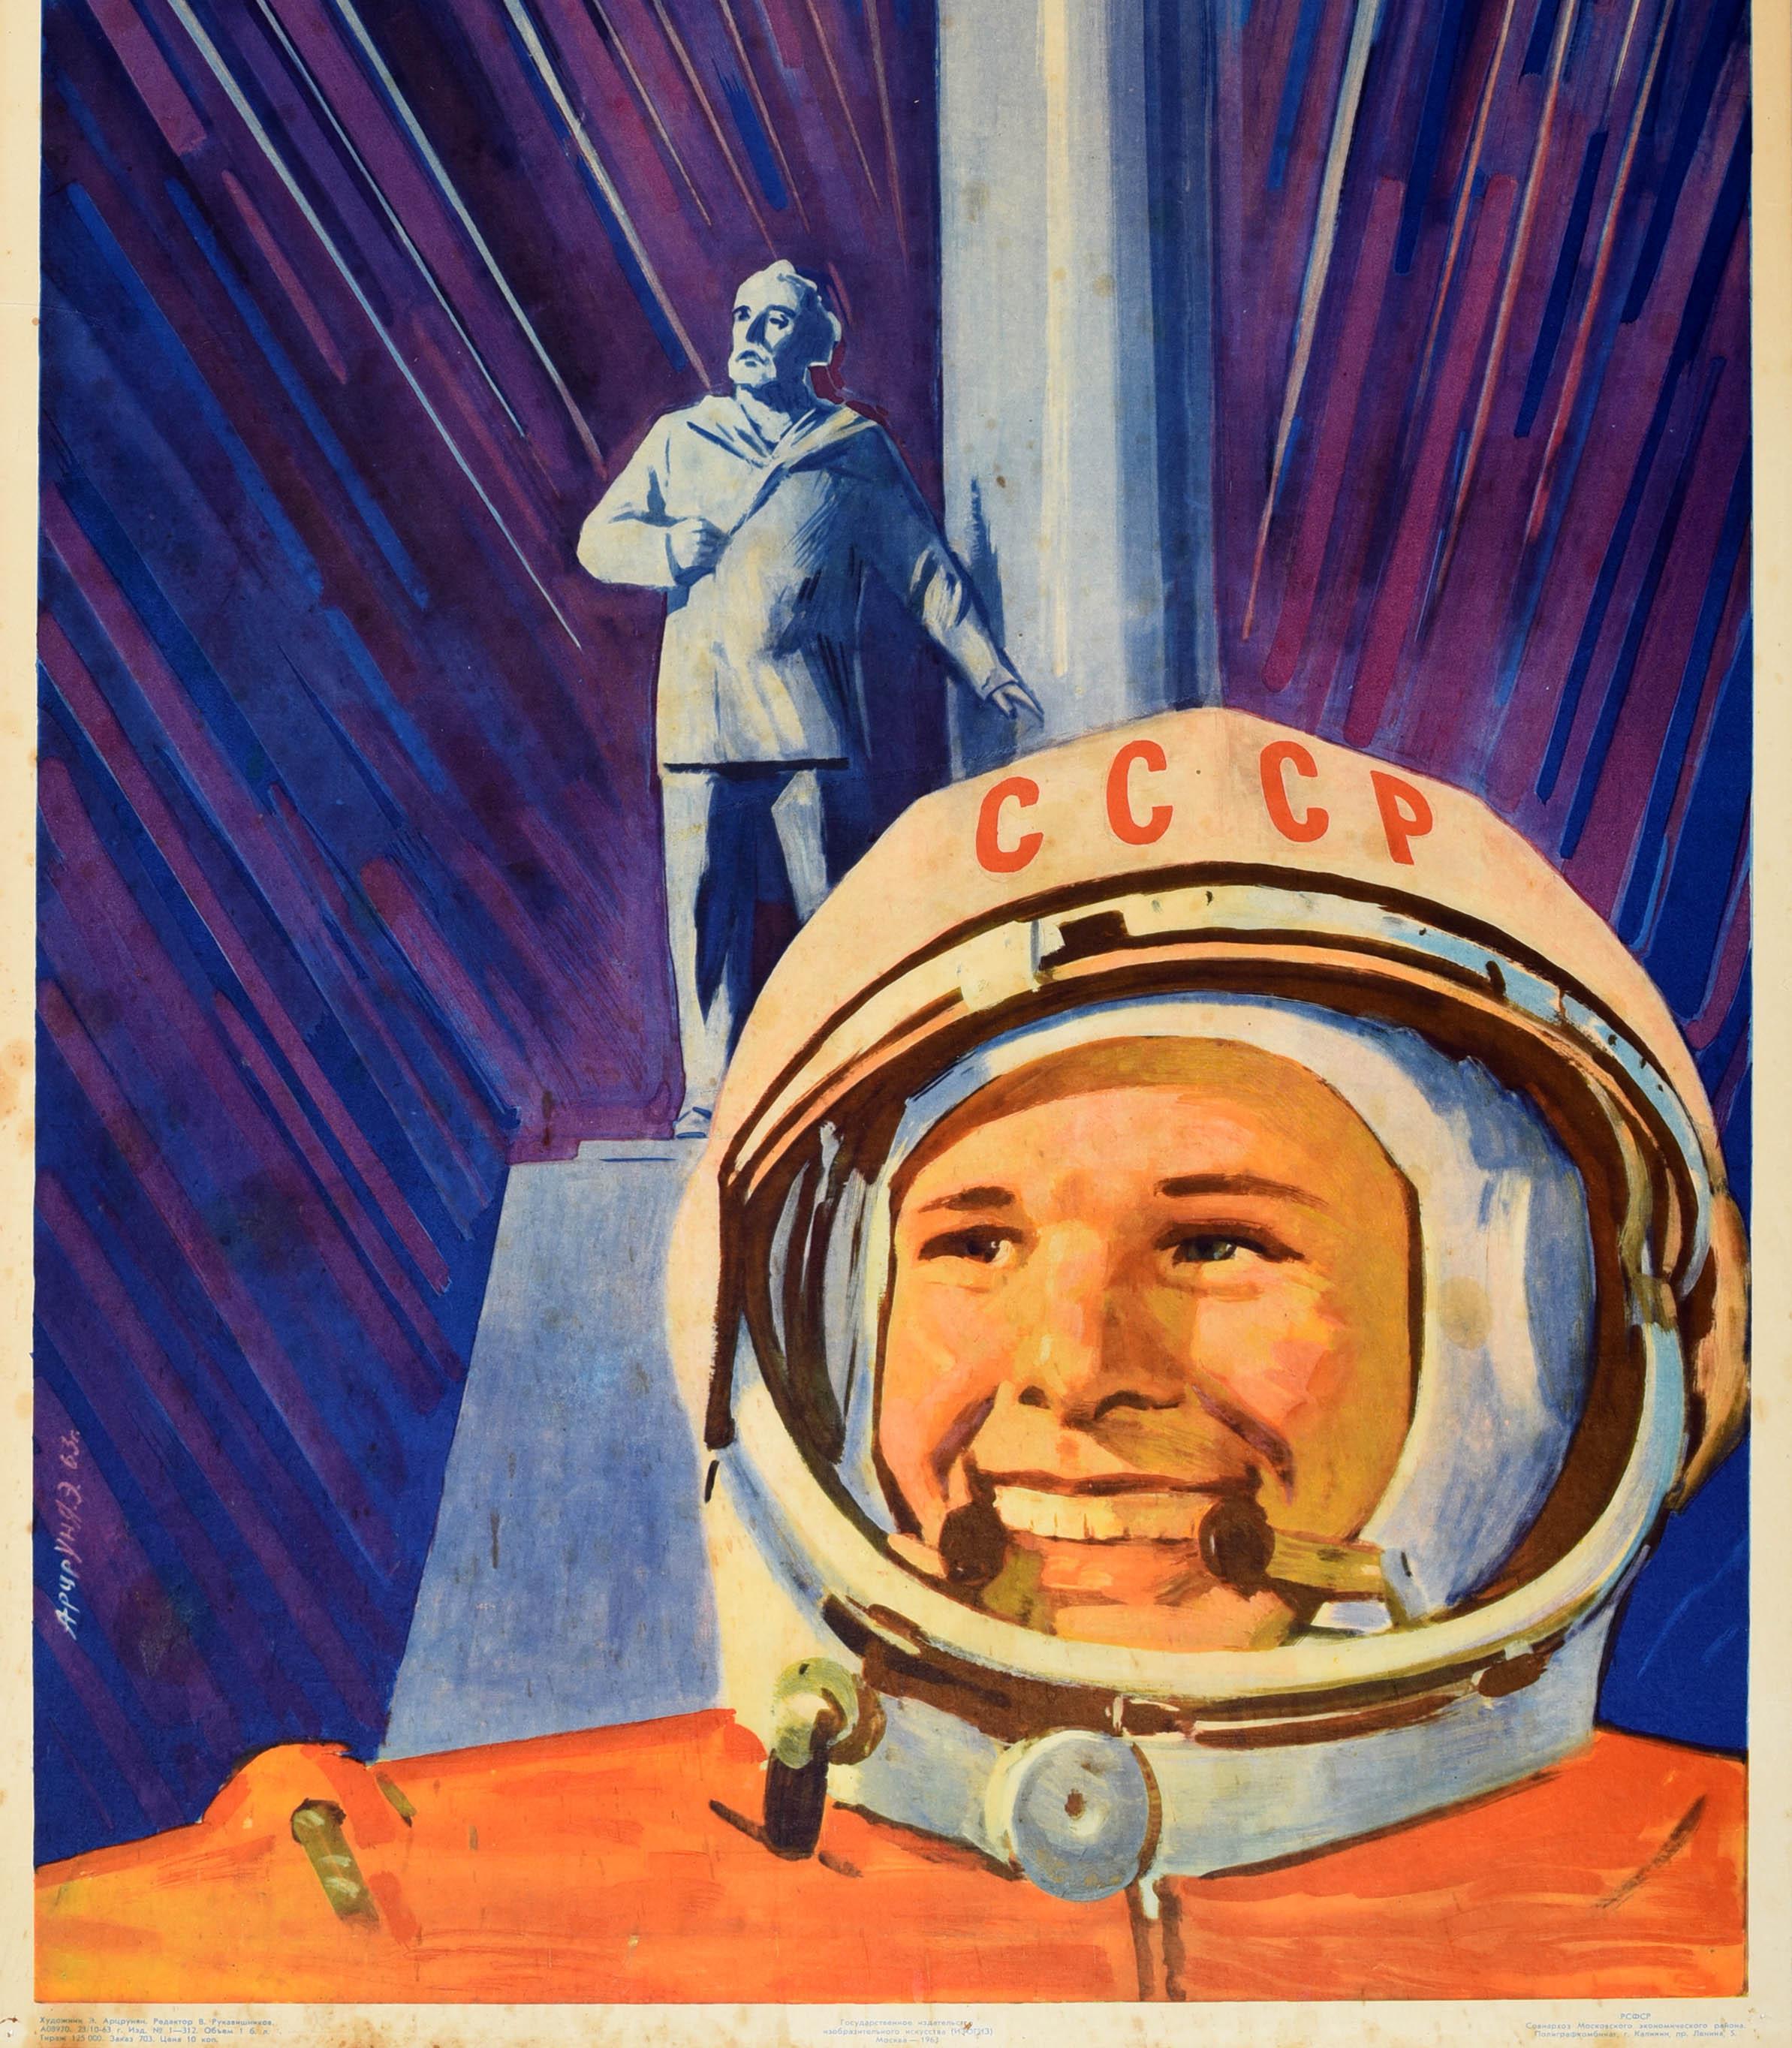 Original vintage Soviet propaganda poster - Our Motherland is the Pioneer of Space! / Наша Родина Пионер Космоса! Dynamic design featuring a smiling Yuri Gagarin (Yuri Alekseyevich Gagarin; 1934-1968), the Soviet pilot and cosmonaut who was the